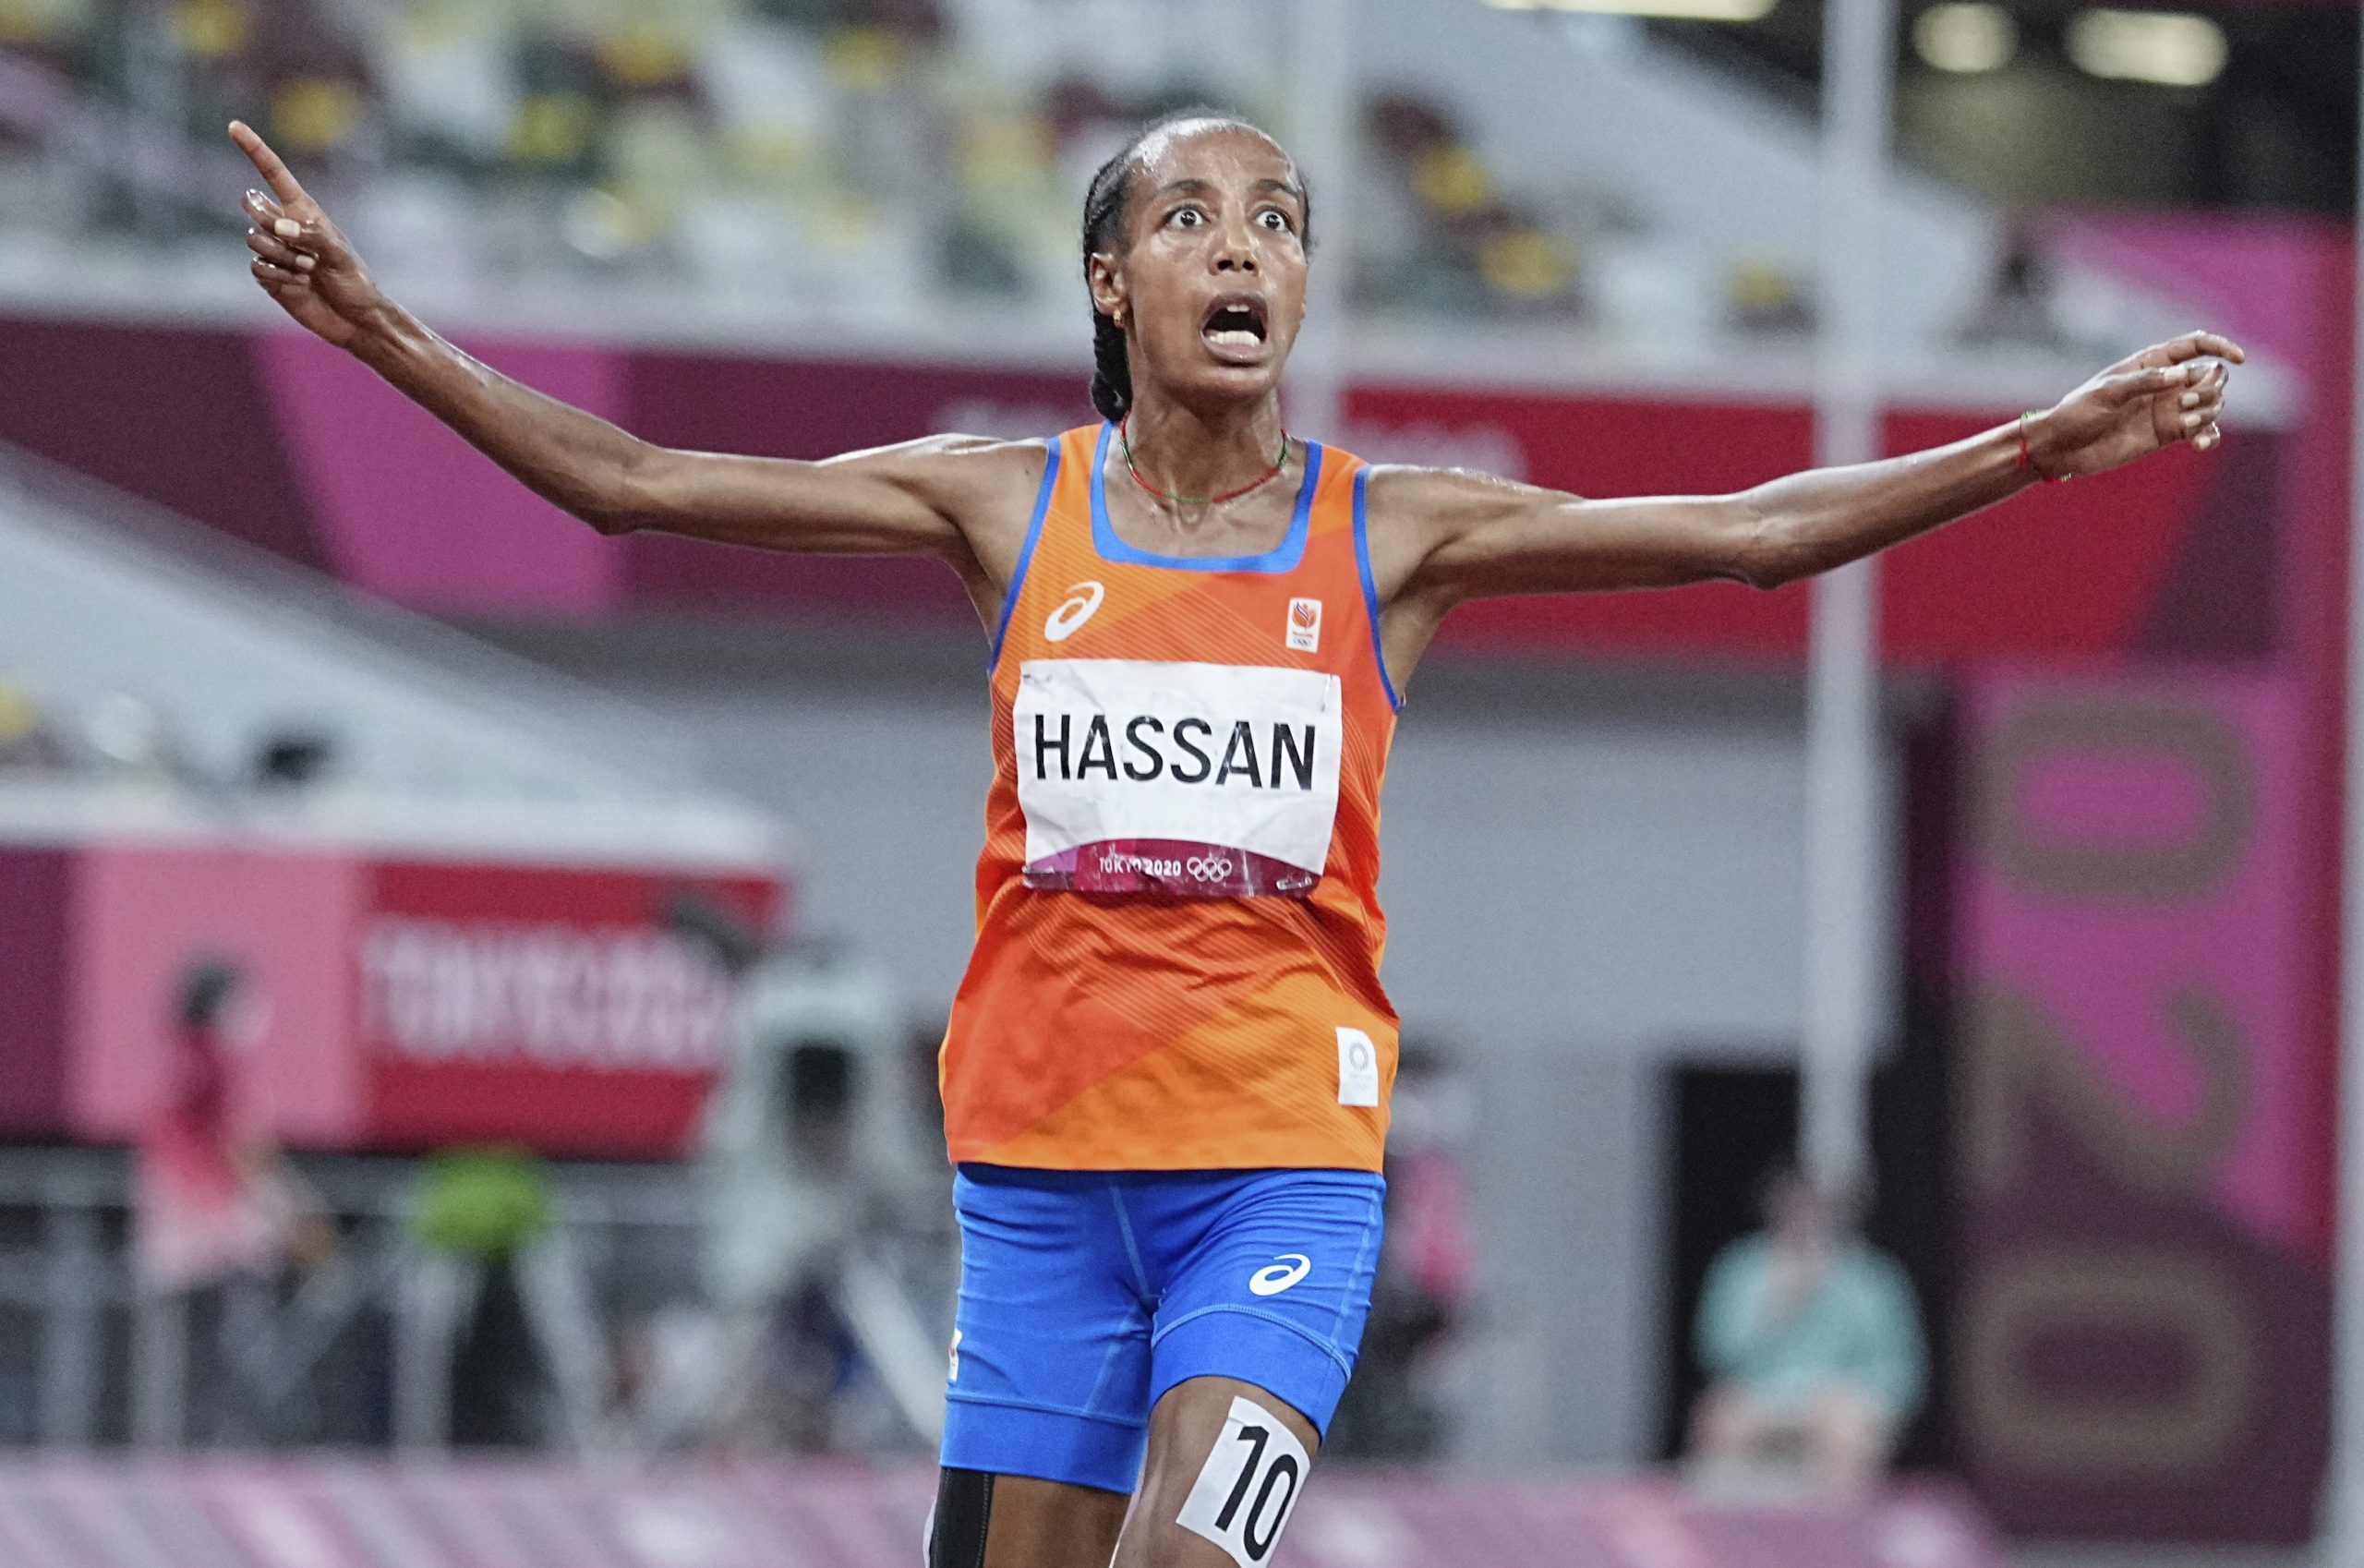 02 August 2021, Japan, Tokio: Athletics: Olympics, 5000m, Women, Final, at the Olympic Stadium. Sifan Hassan from the Netherlands cheers at the finish. Photo by: Michael Kappeler/picture-alliance/dpa/AP Images